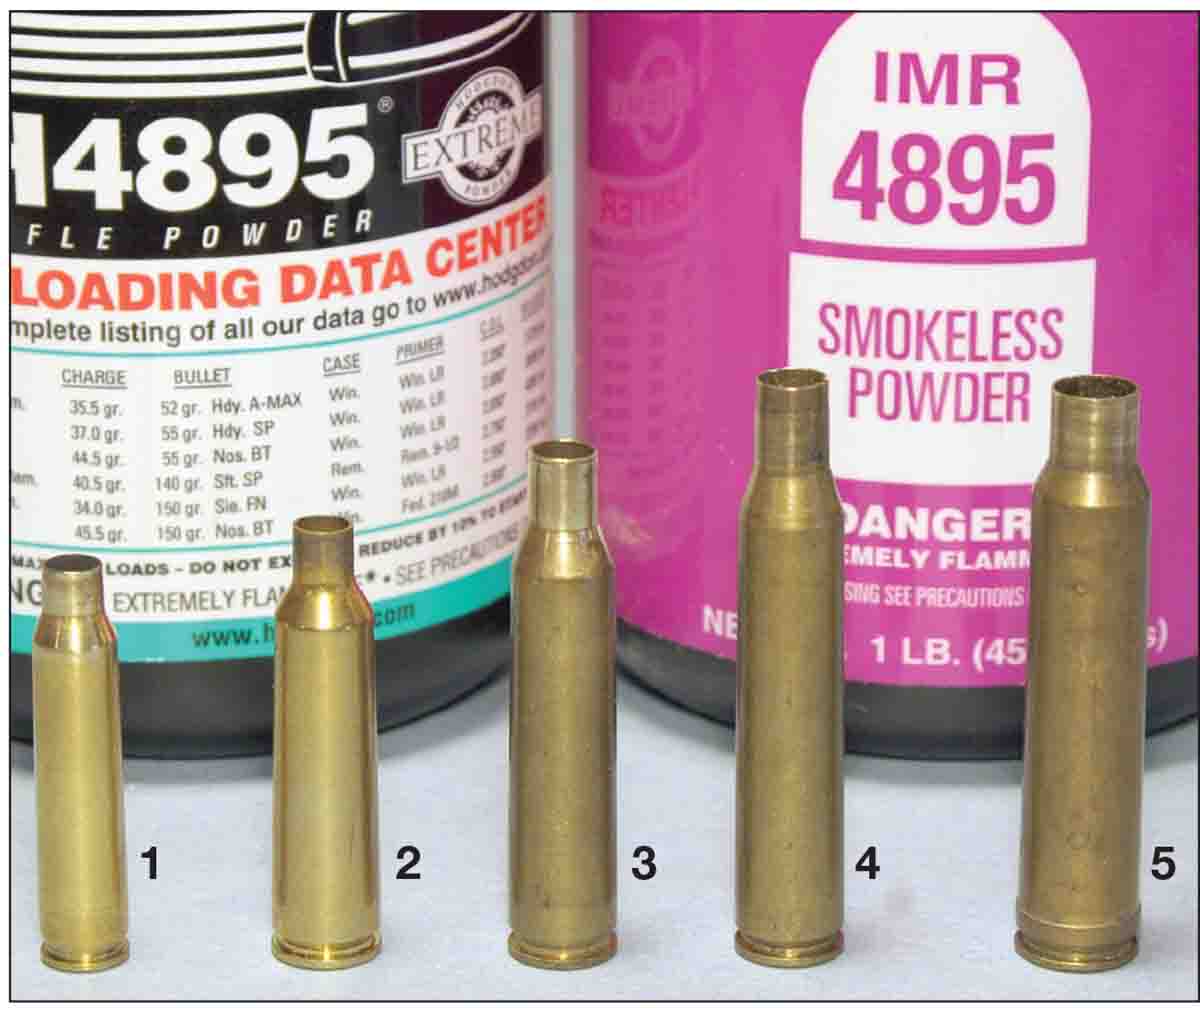 Charges of H-4895 and IMR-4895 can be cut to 60 percent of maximum and still produce fine accuracy for reduced loads in cartridges including: (1) .223 Remington, (2) .22-250 Remington, (3) .257 Roberts, (4) .270 Winchester and (5) .338 Winchester Magnum.